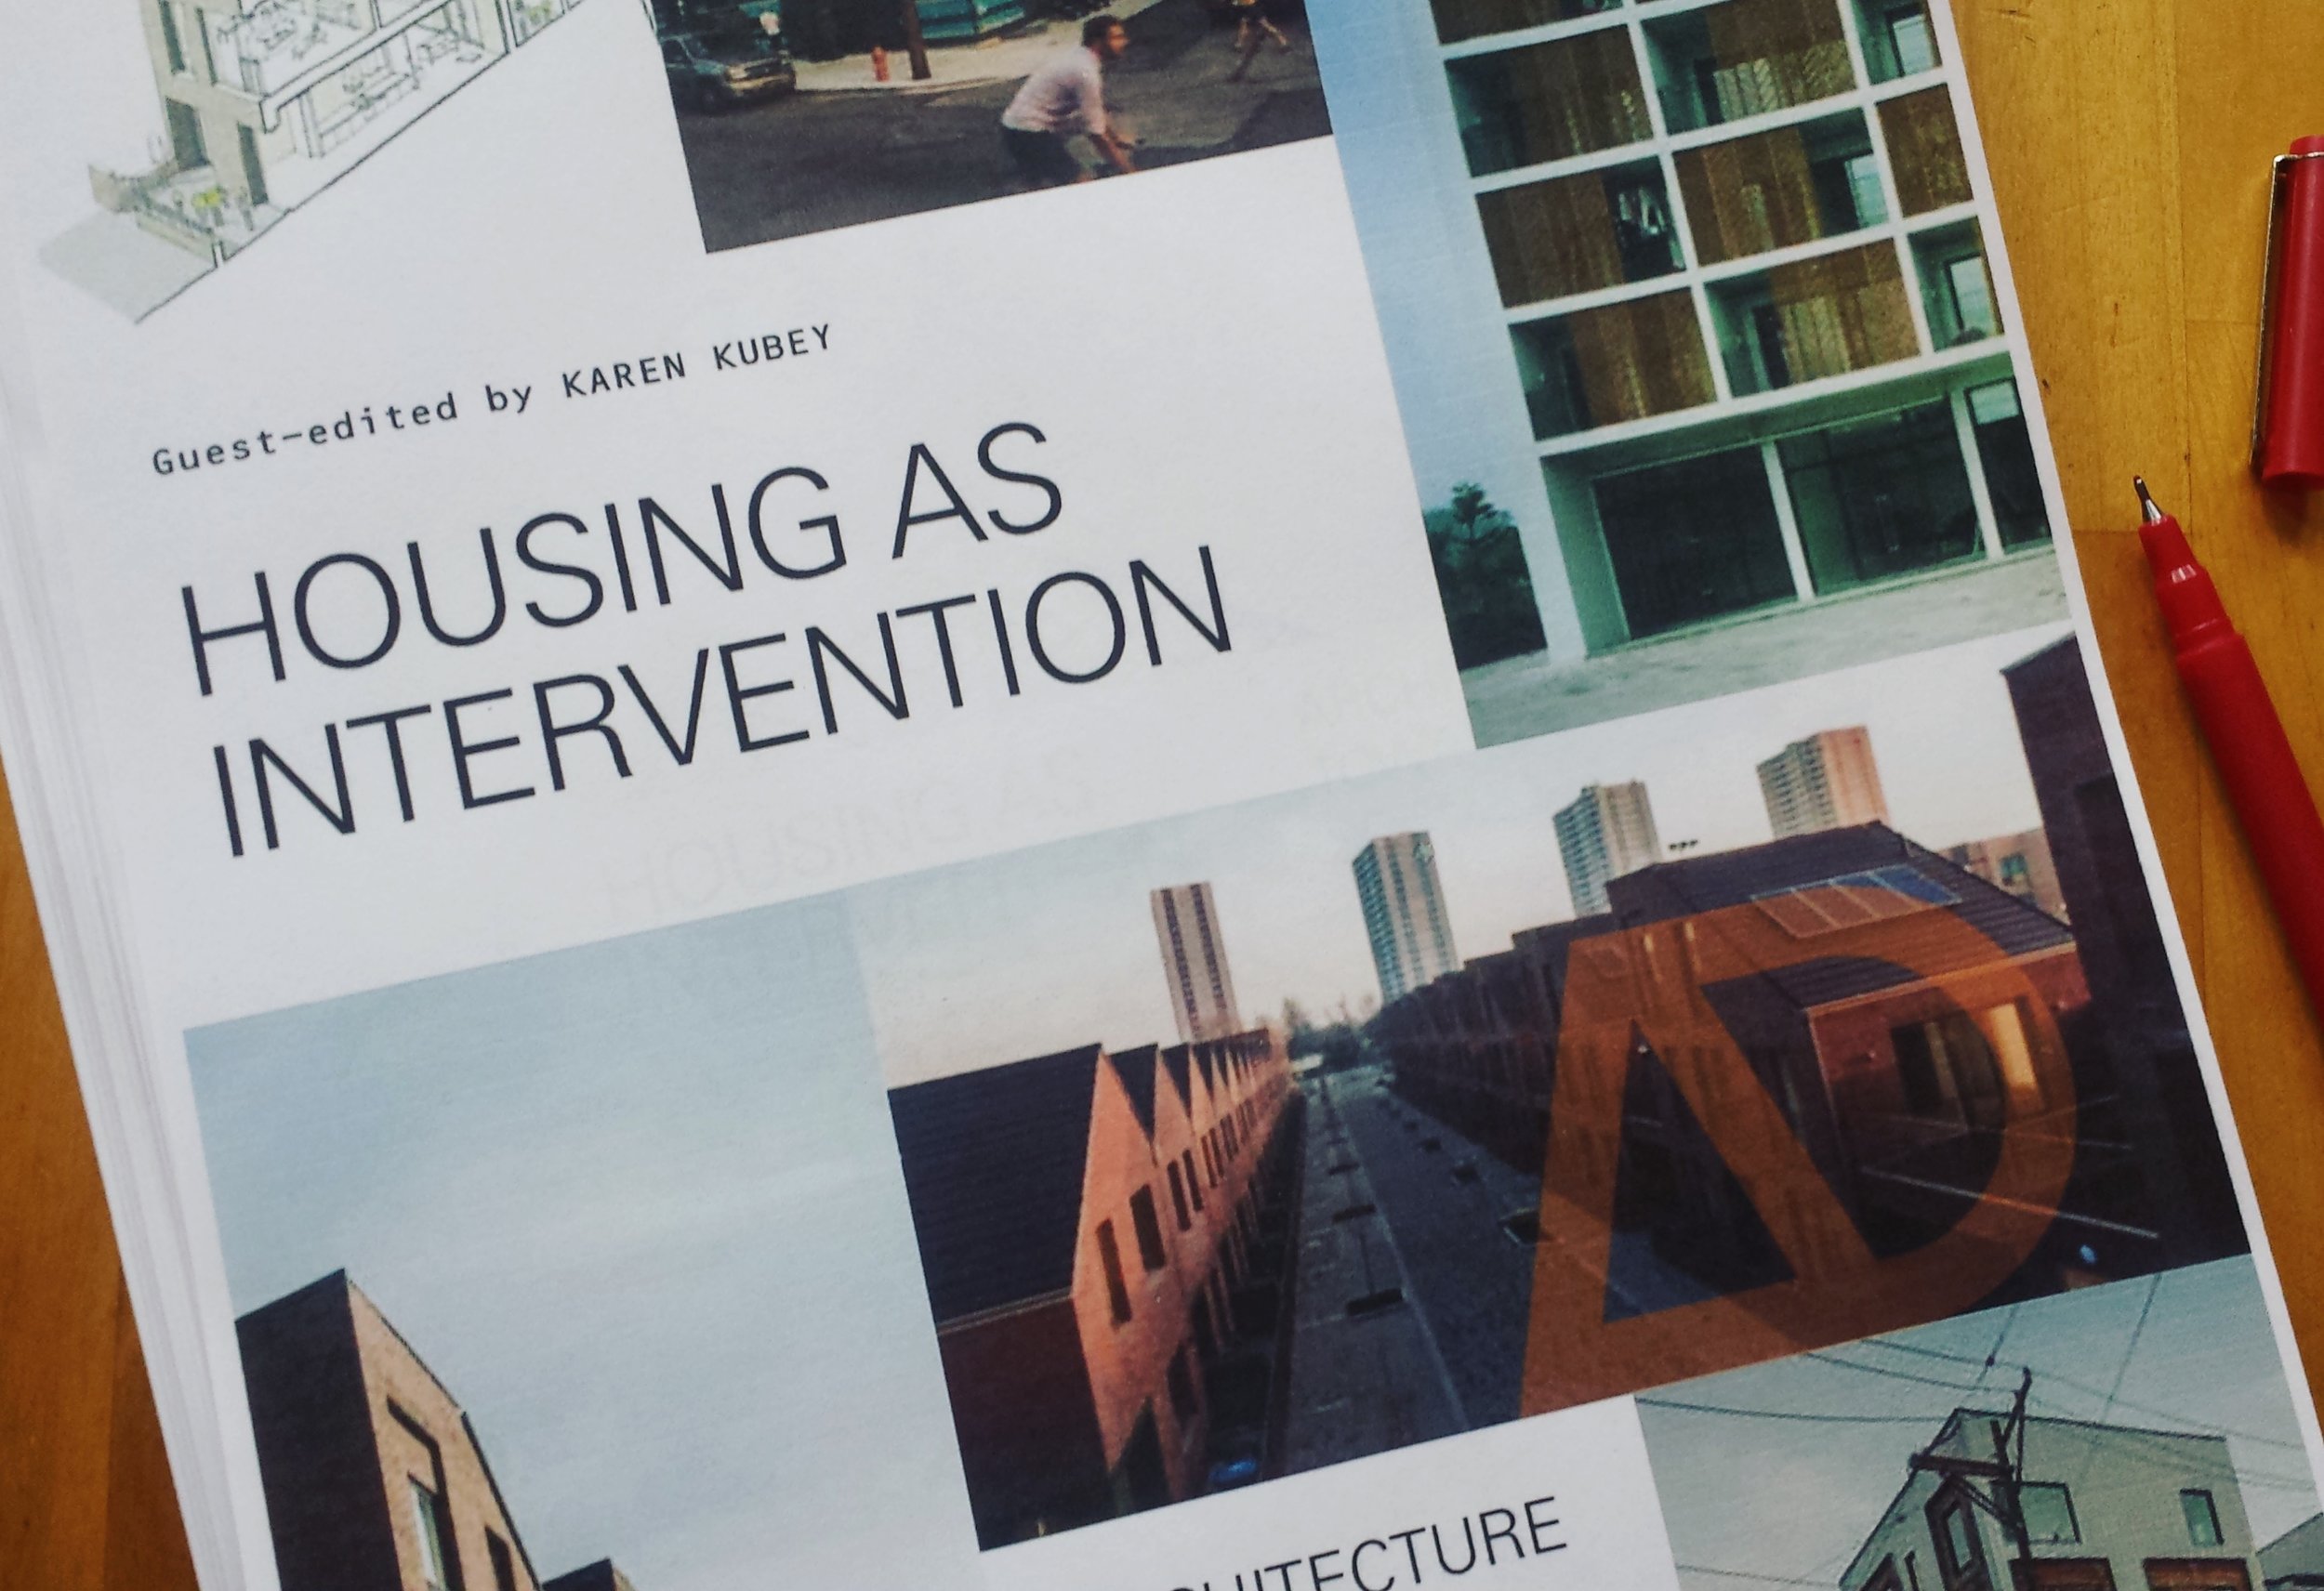 Housing as Intervention: Architecture towards Social Equity